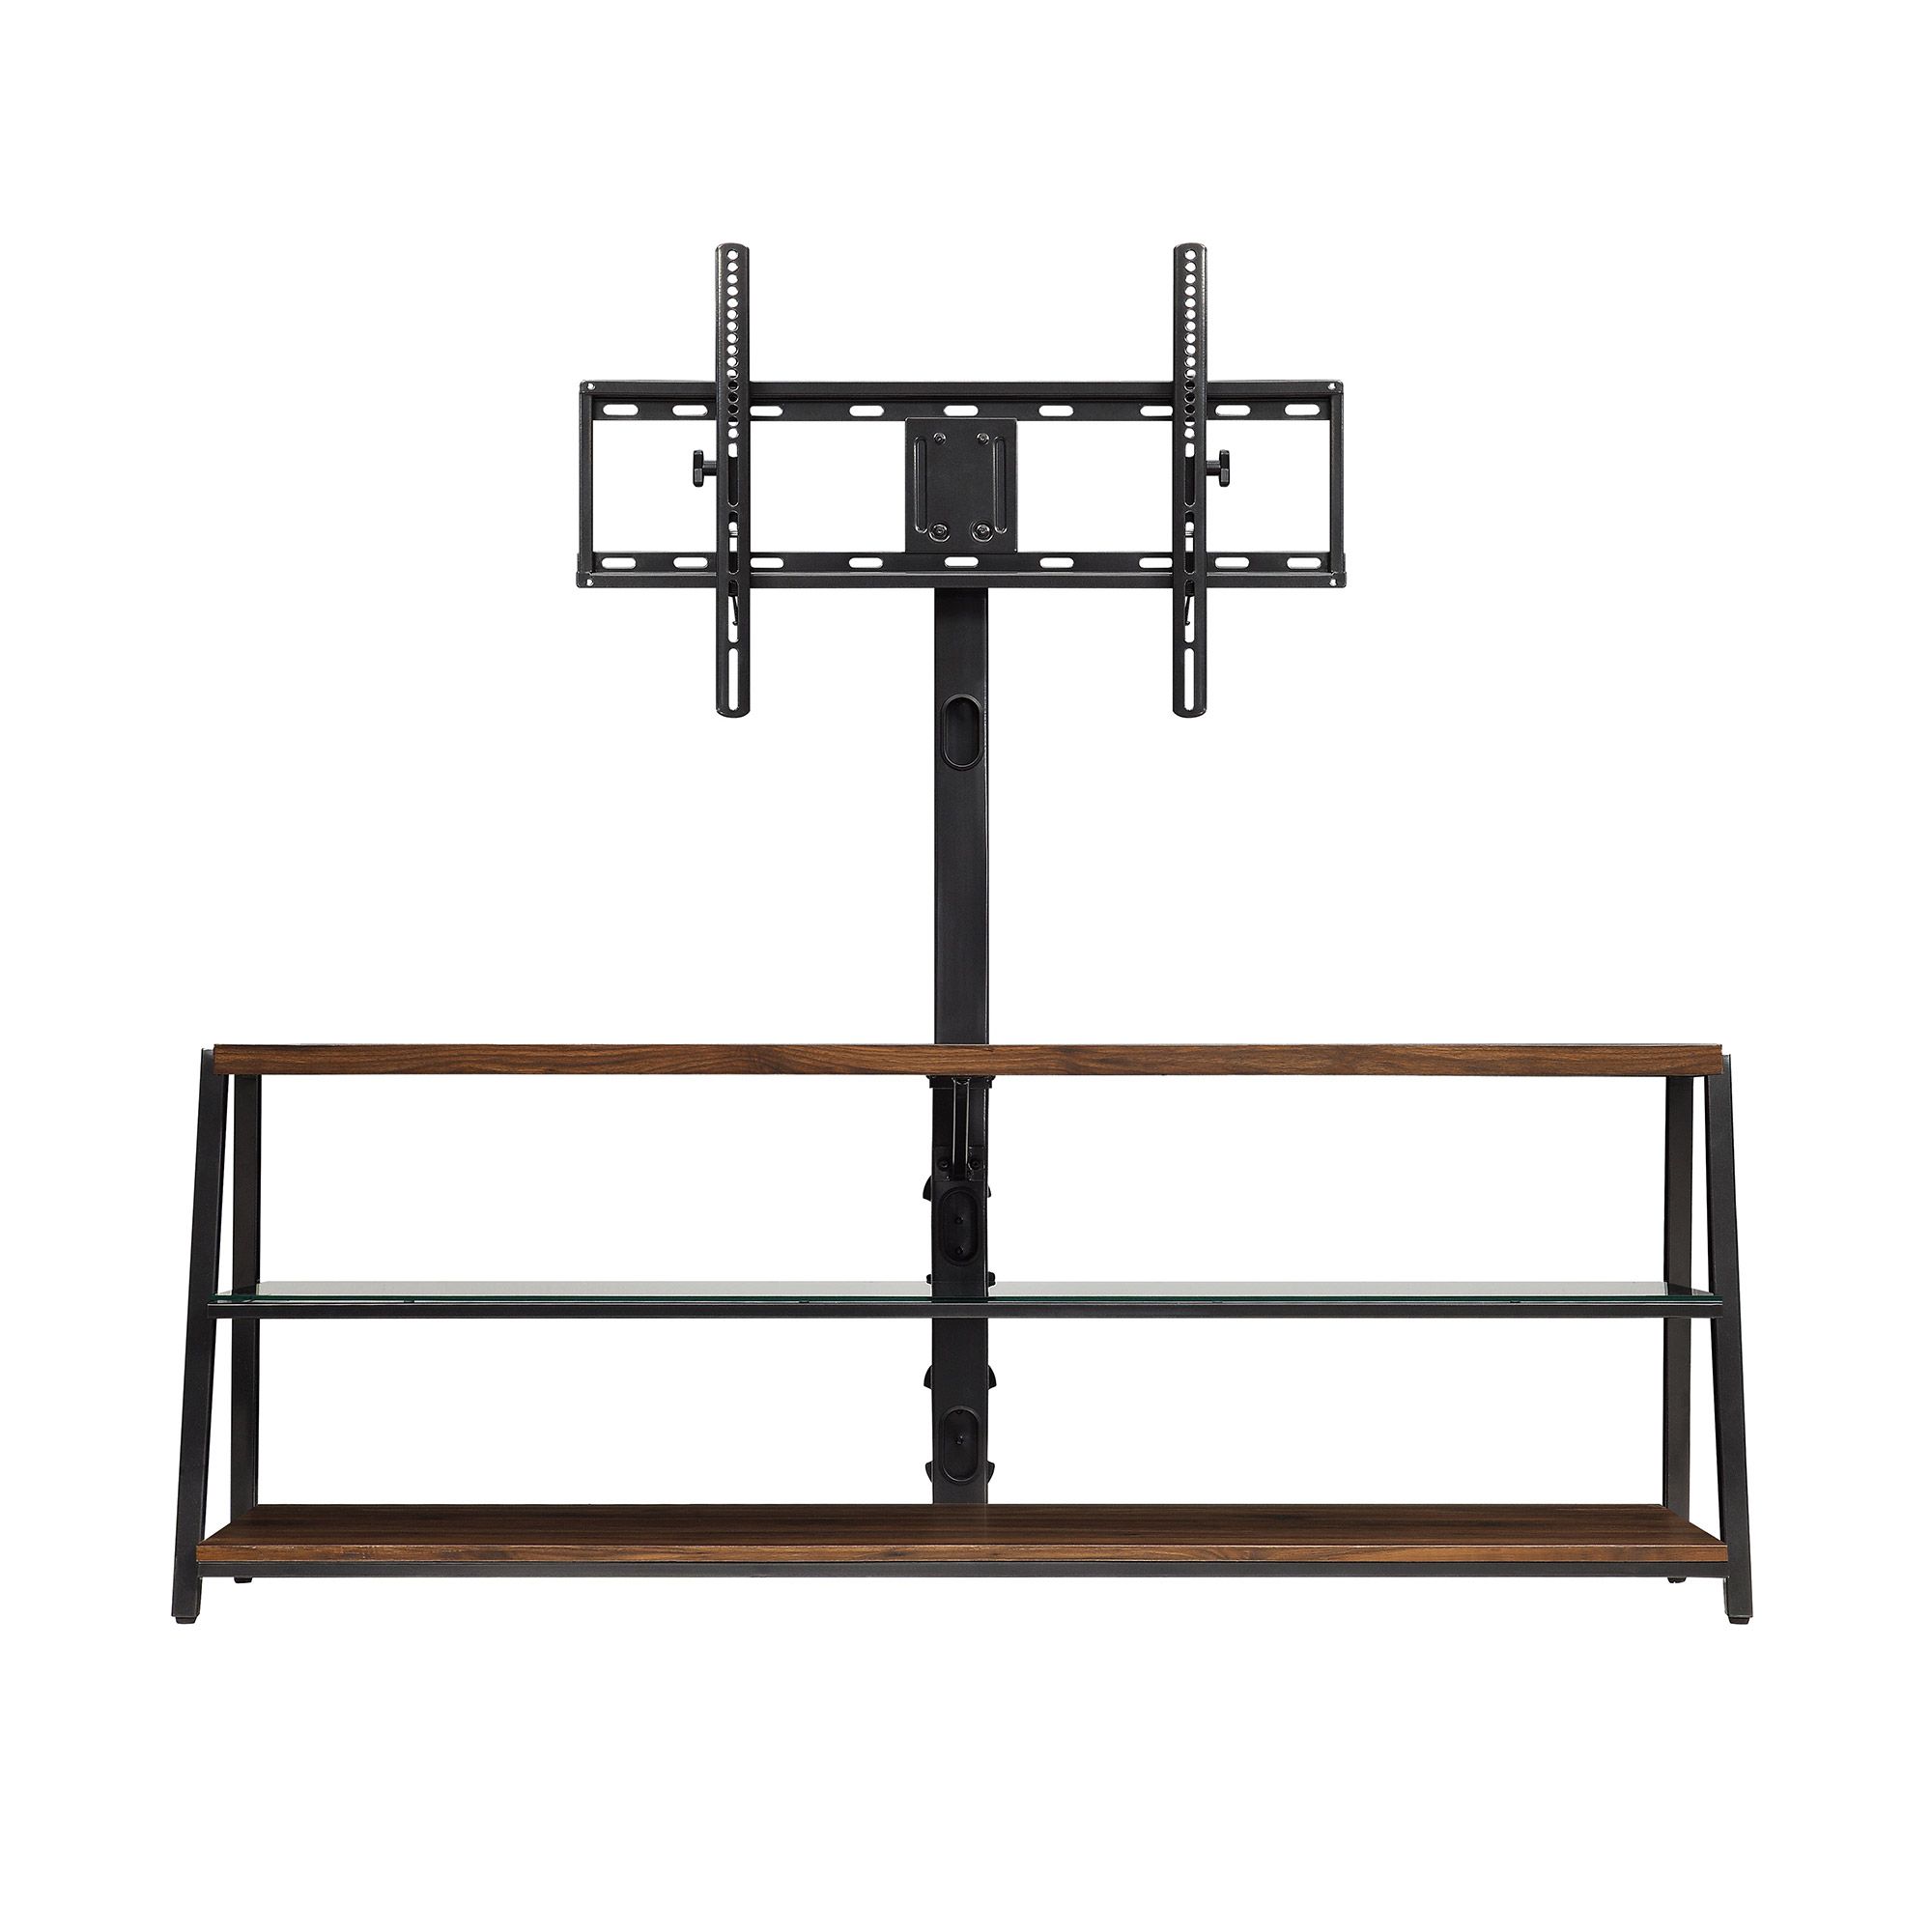 Famous Mainstays Arris 3 In 1 Tv Stand For Televisions Up To 70 Pertaining To Mainstays Arris 3 In 1 Tv Stands In Canyon Walnut Finish (View 6 of 10)